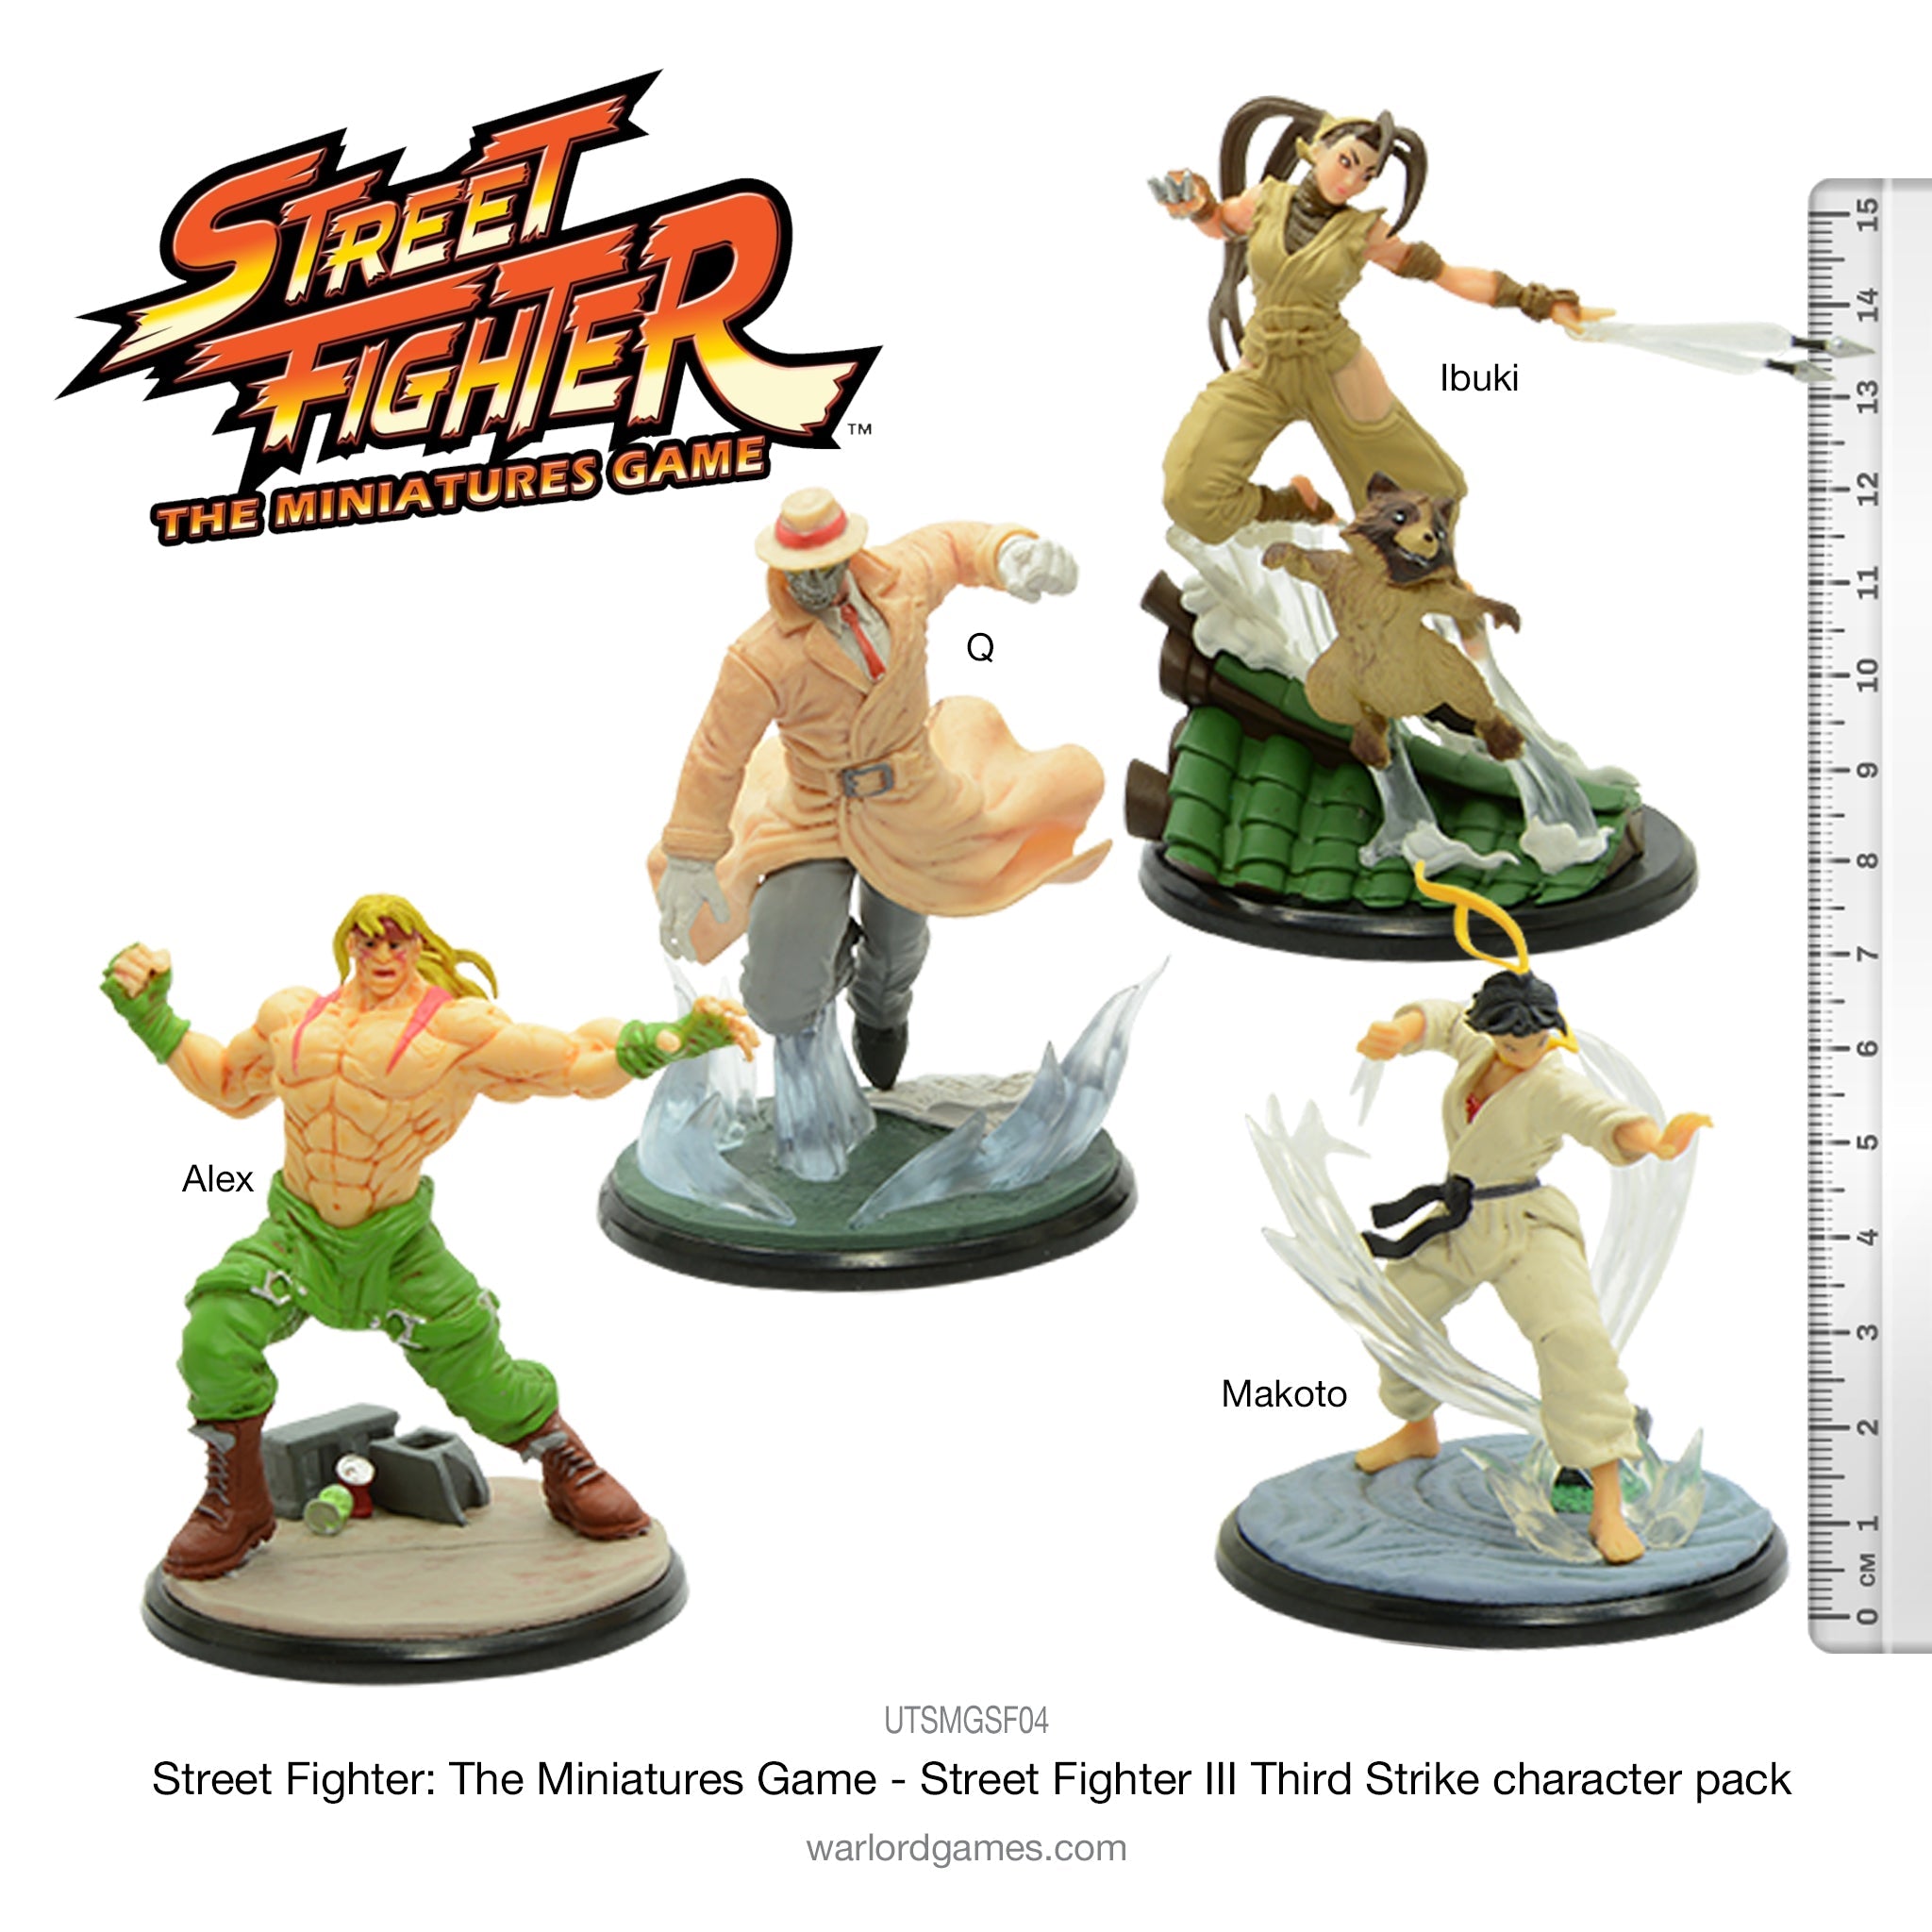 http://us.warlordgames.com/cdn/shop/products/UTSMGSF04-Street-Fighter-The-Miniatures-Game---Street-Fighter-III-Third-Strike-character-pack1.jpg?v=1670595160